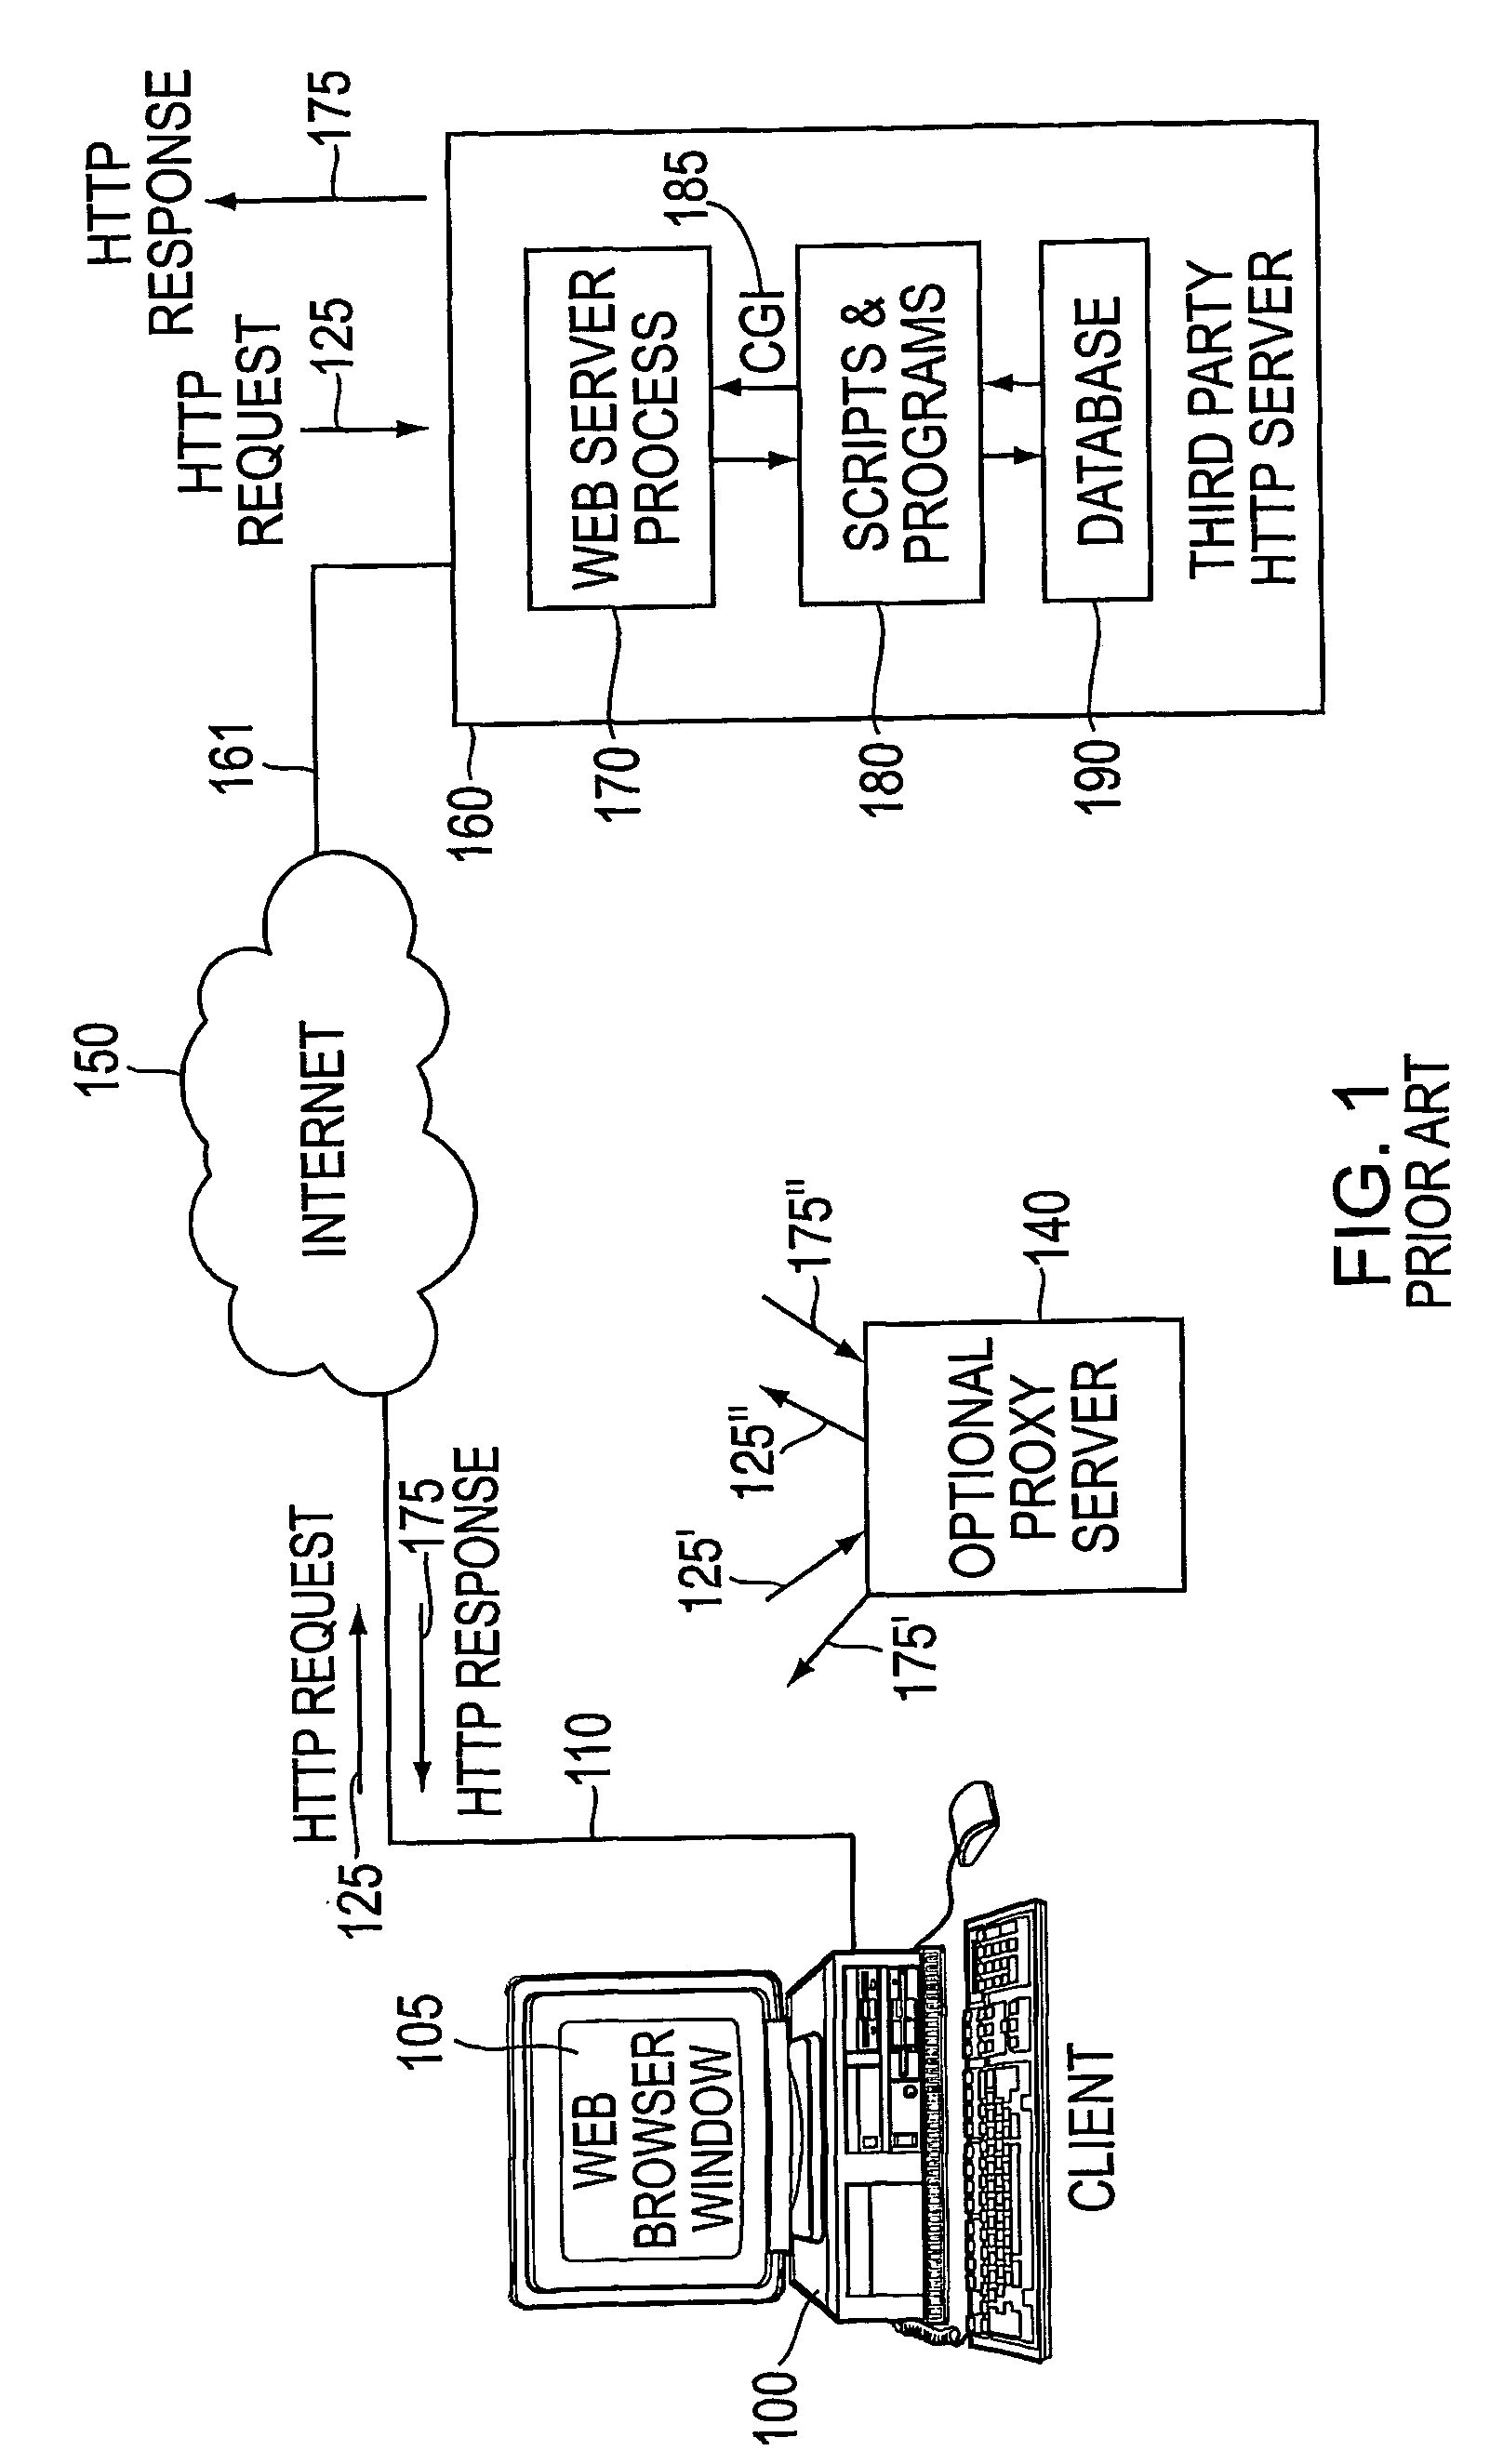 System for providing session-based network privacy, private, persistent storage, and discretionary access control for sharing private data